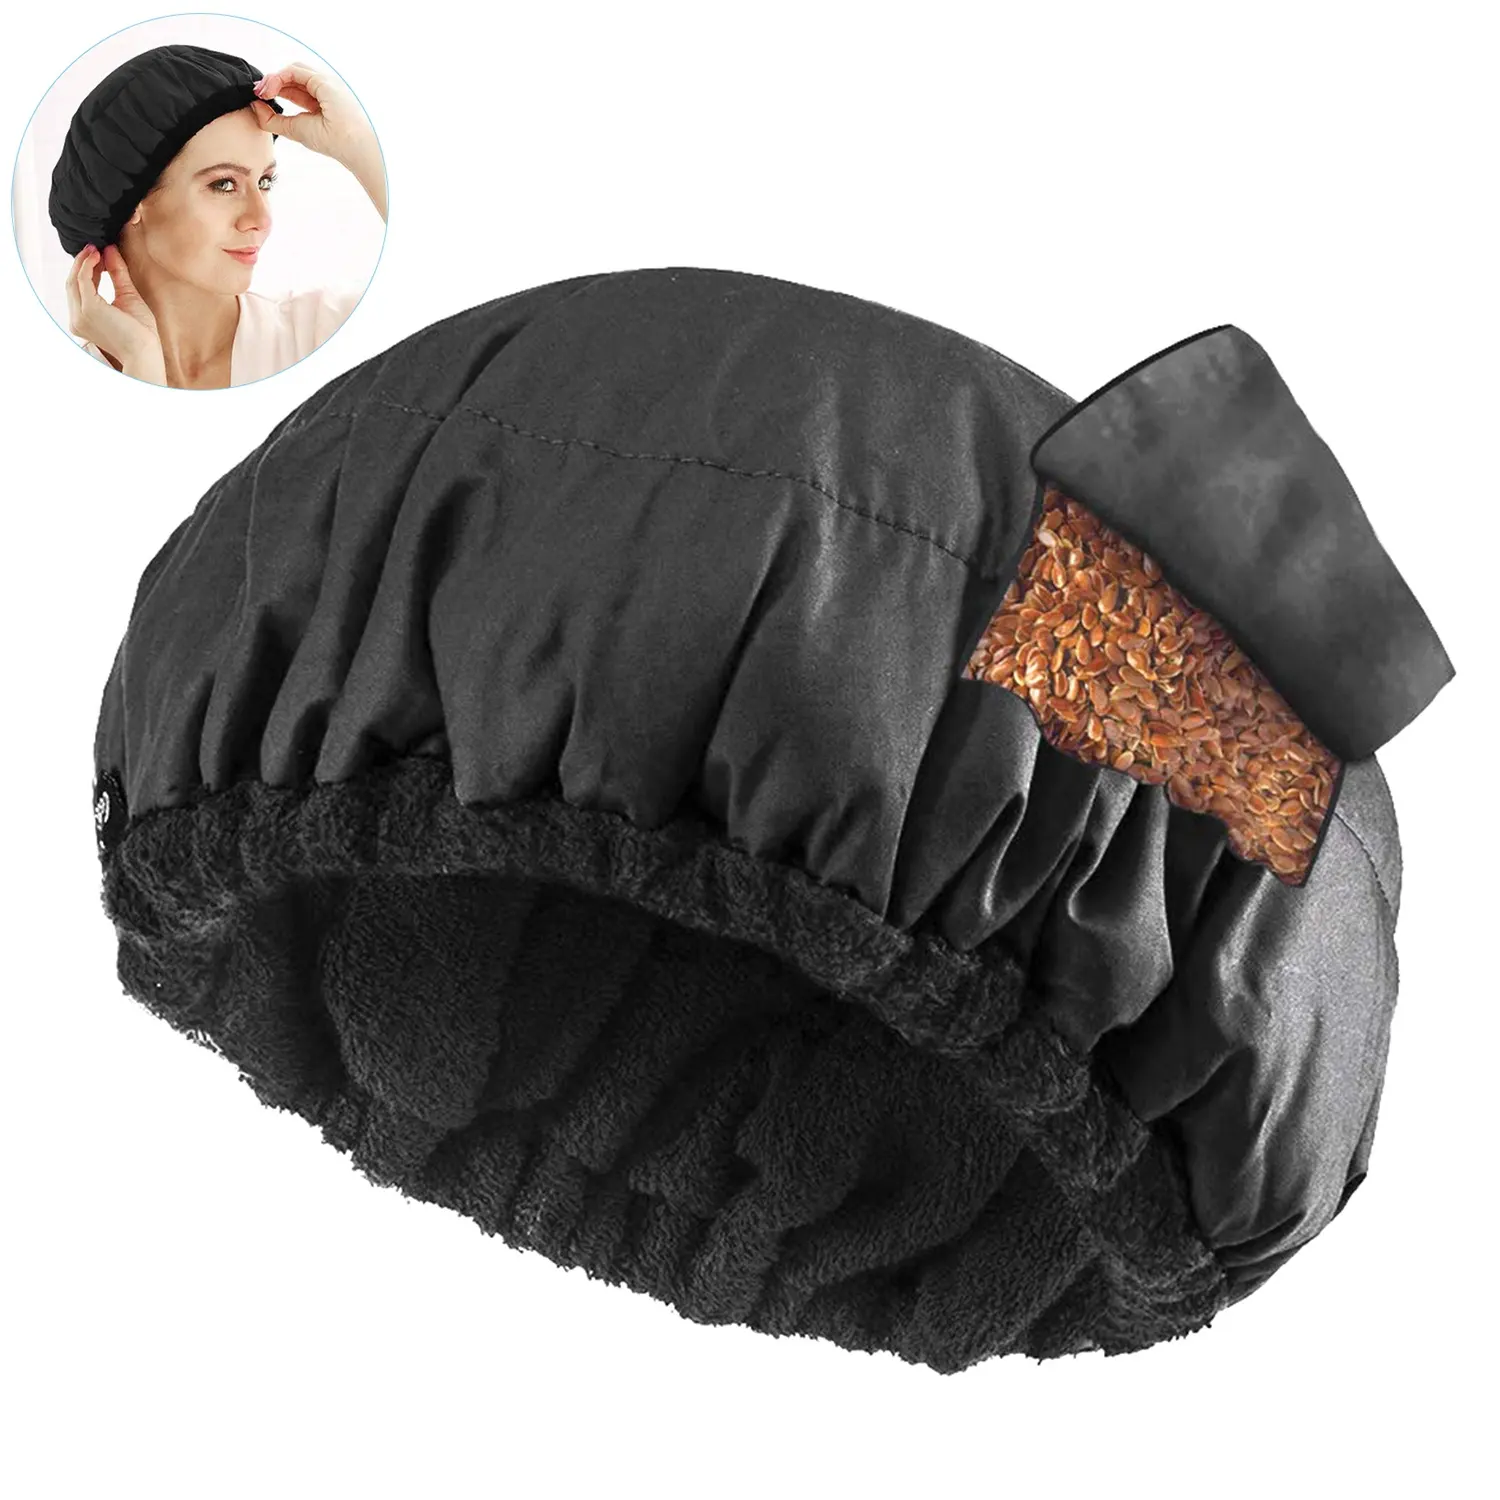 Cordless Deep Conditioning Heat Cap - Hair Styling and Treatment Deep heat cap Microwavable Heat Cap for Steaming Hair Styling